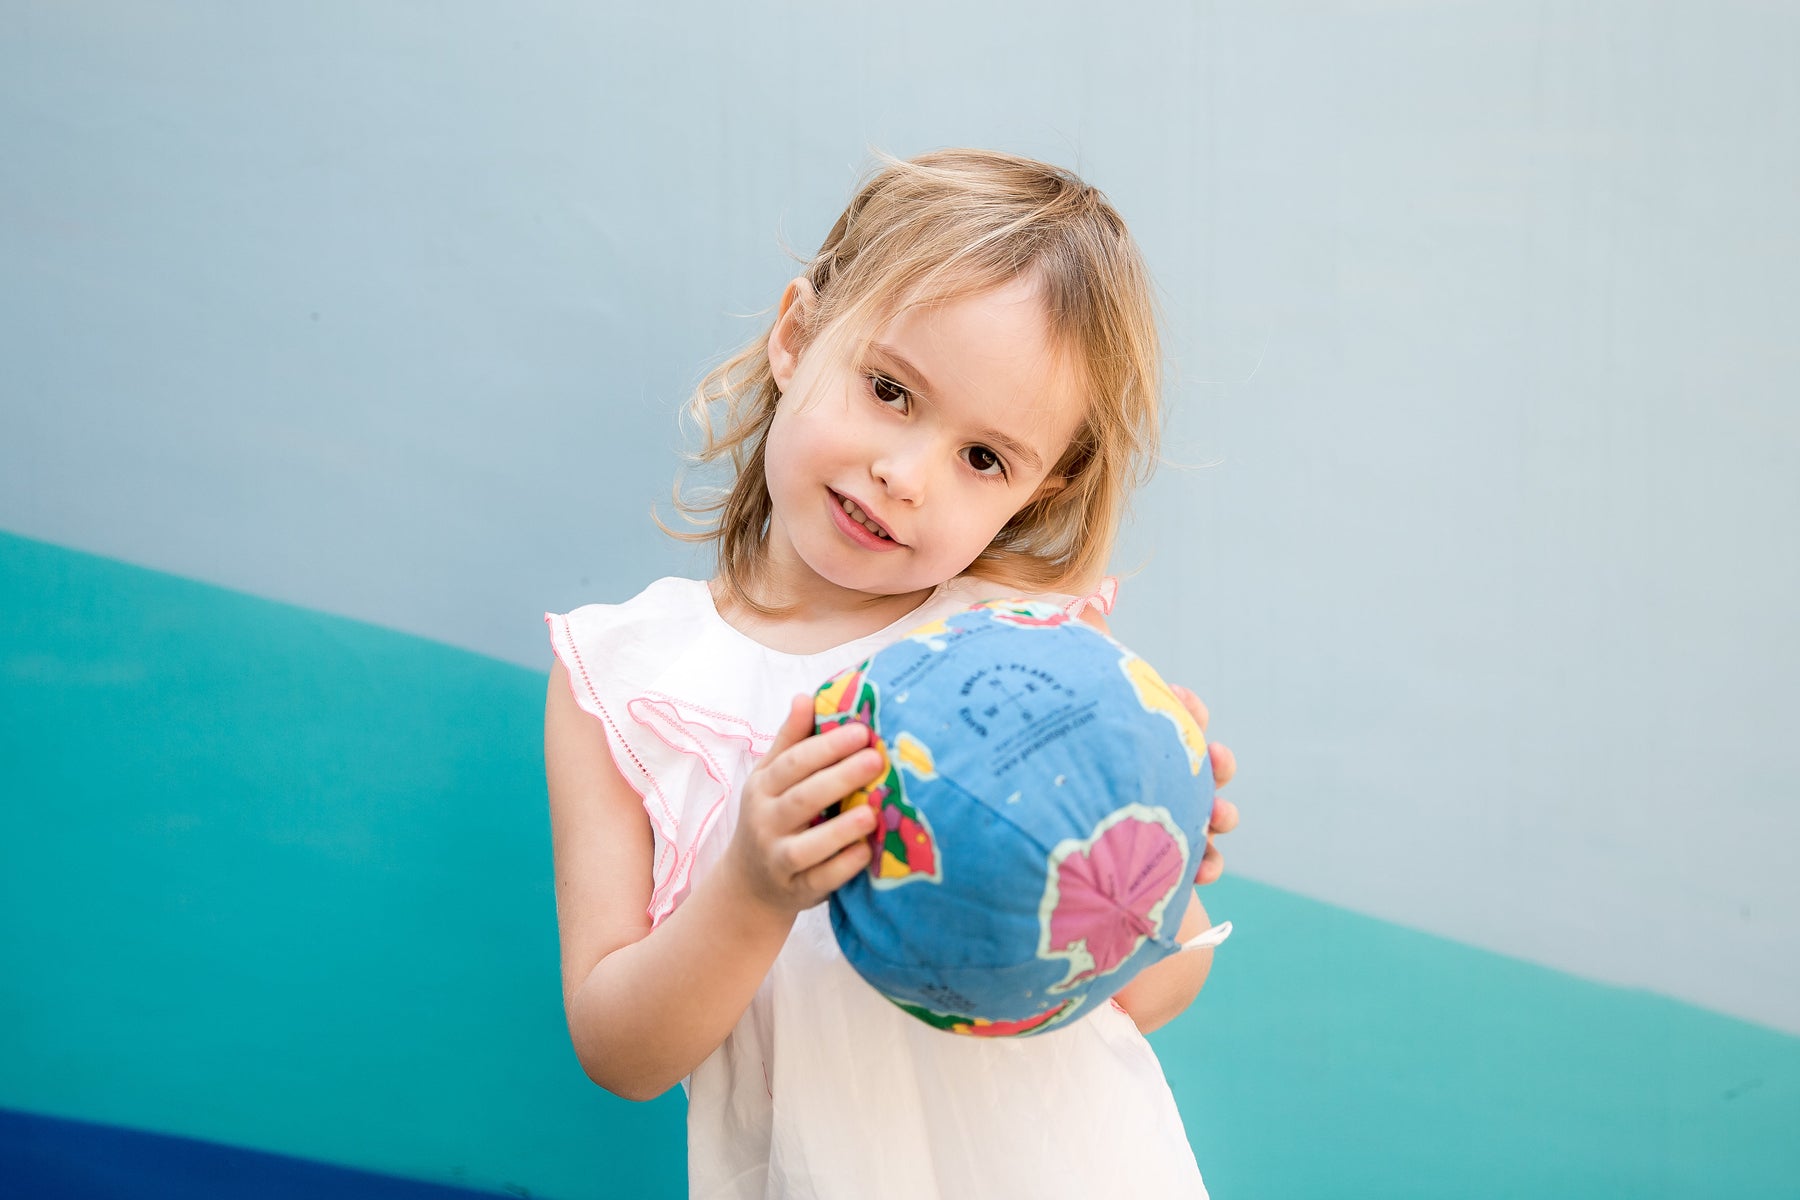 In the Know: 9 Daily Changes to Help Introduce Your Kids to Sustainability